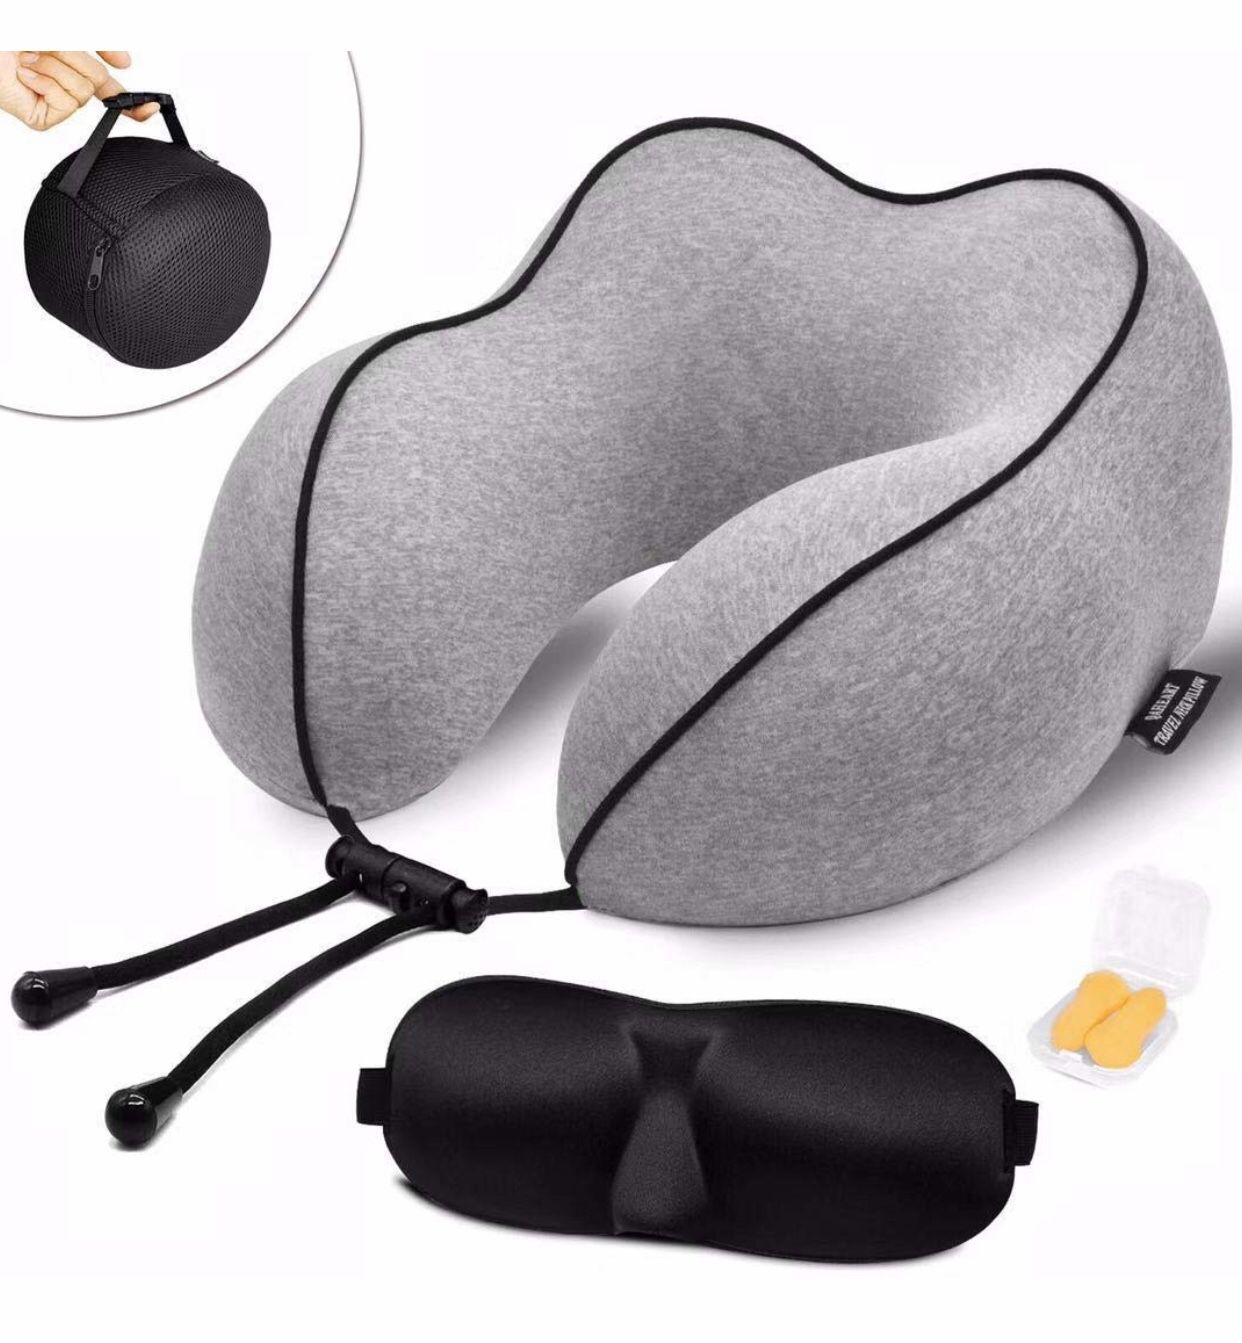 100% Pure Memory Foam Travel Pillow, Breathable & Comfortable Neck Pillow with Removable, Machine Washable Pillowcase, Travel Kit with Airplane Pillo